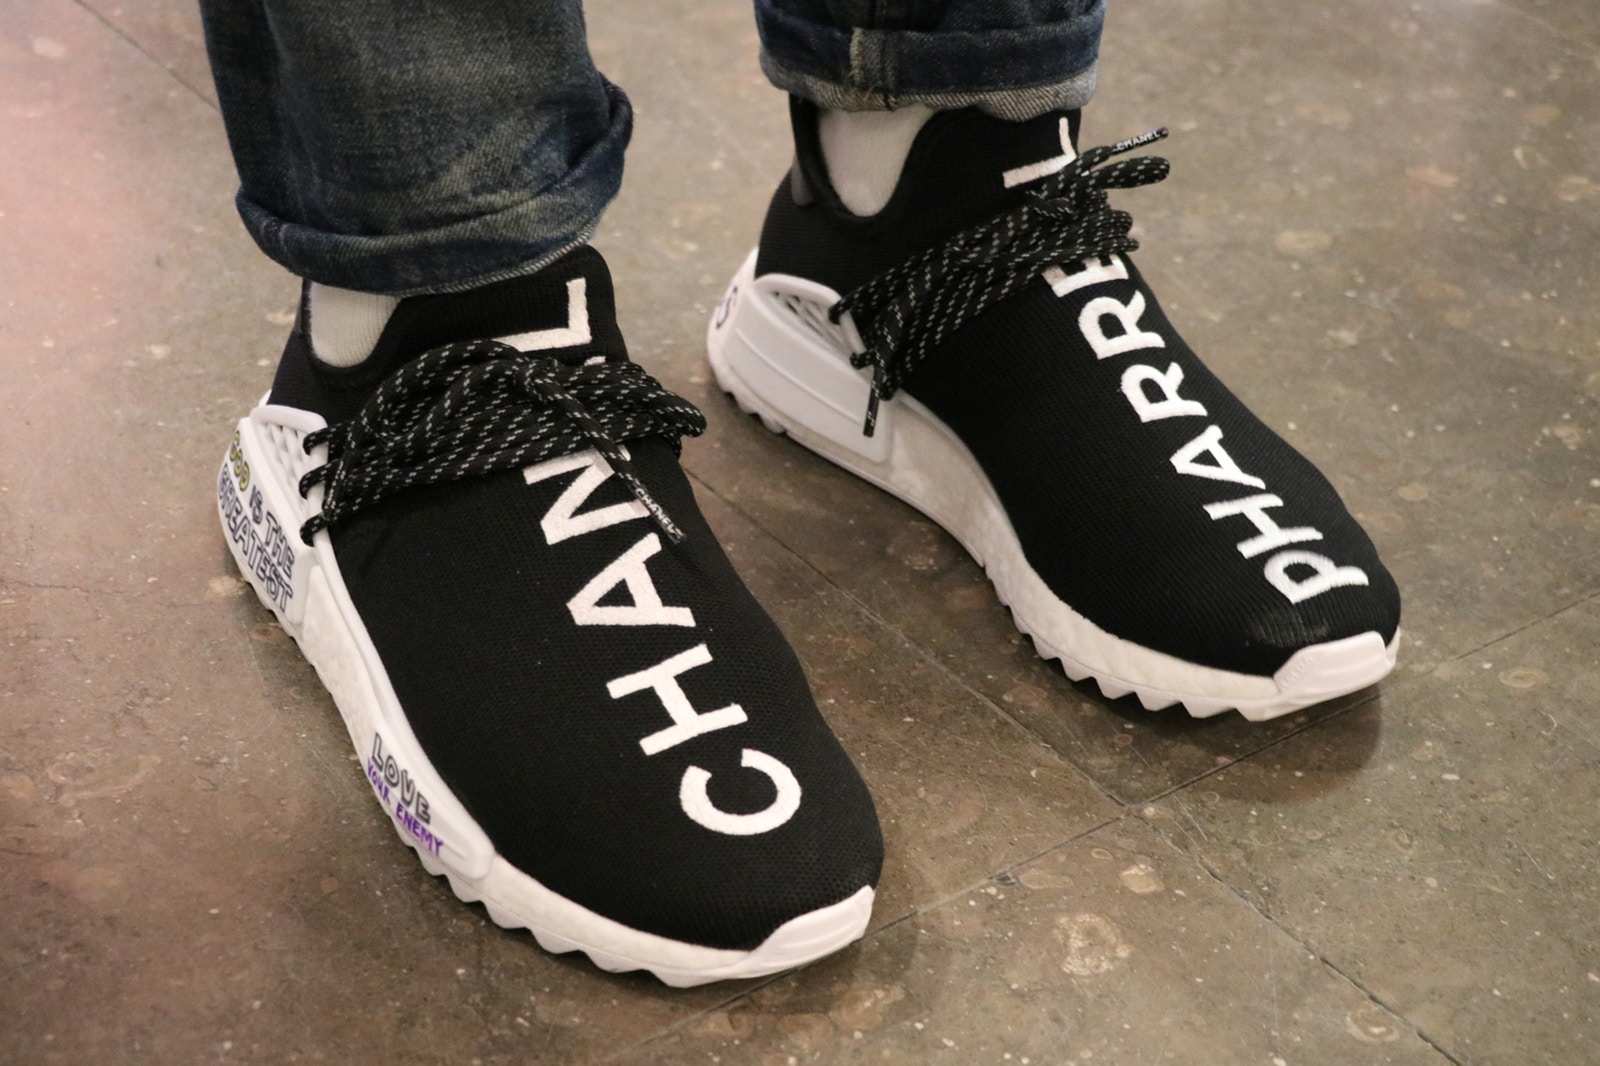 nmd chanel price